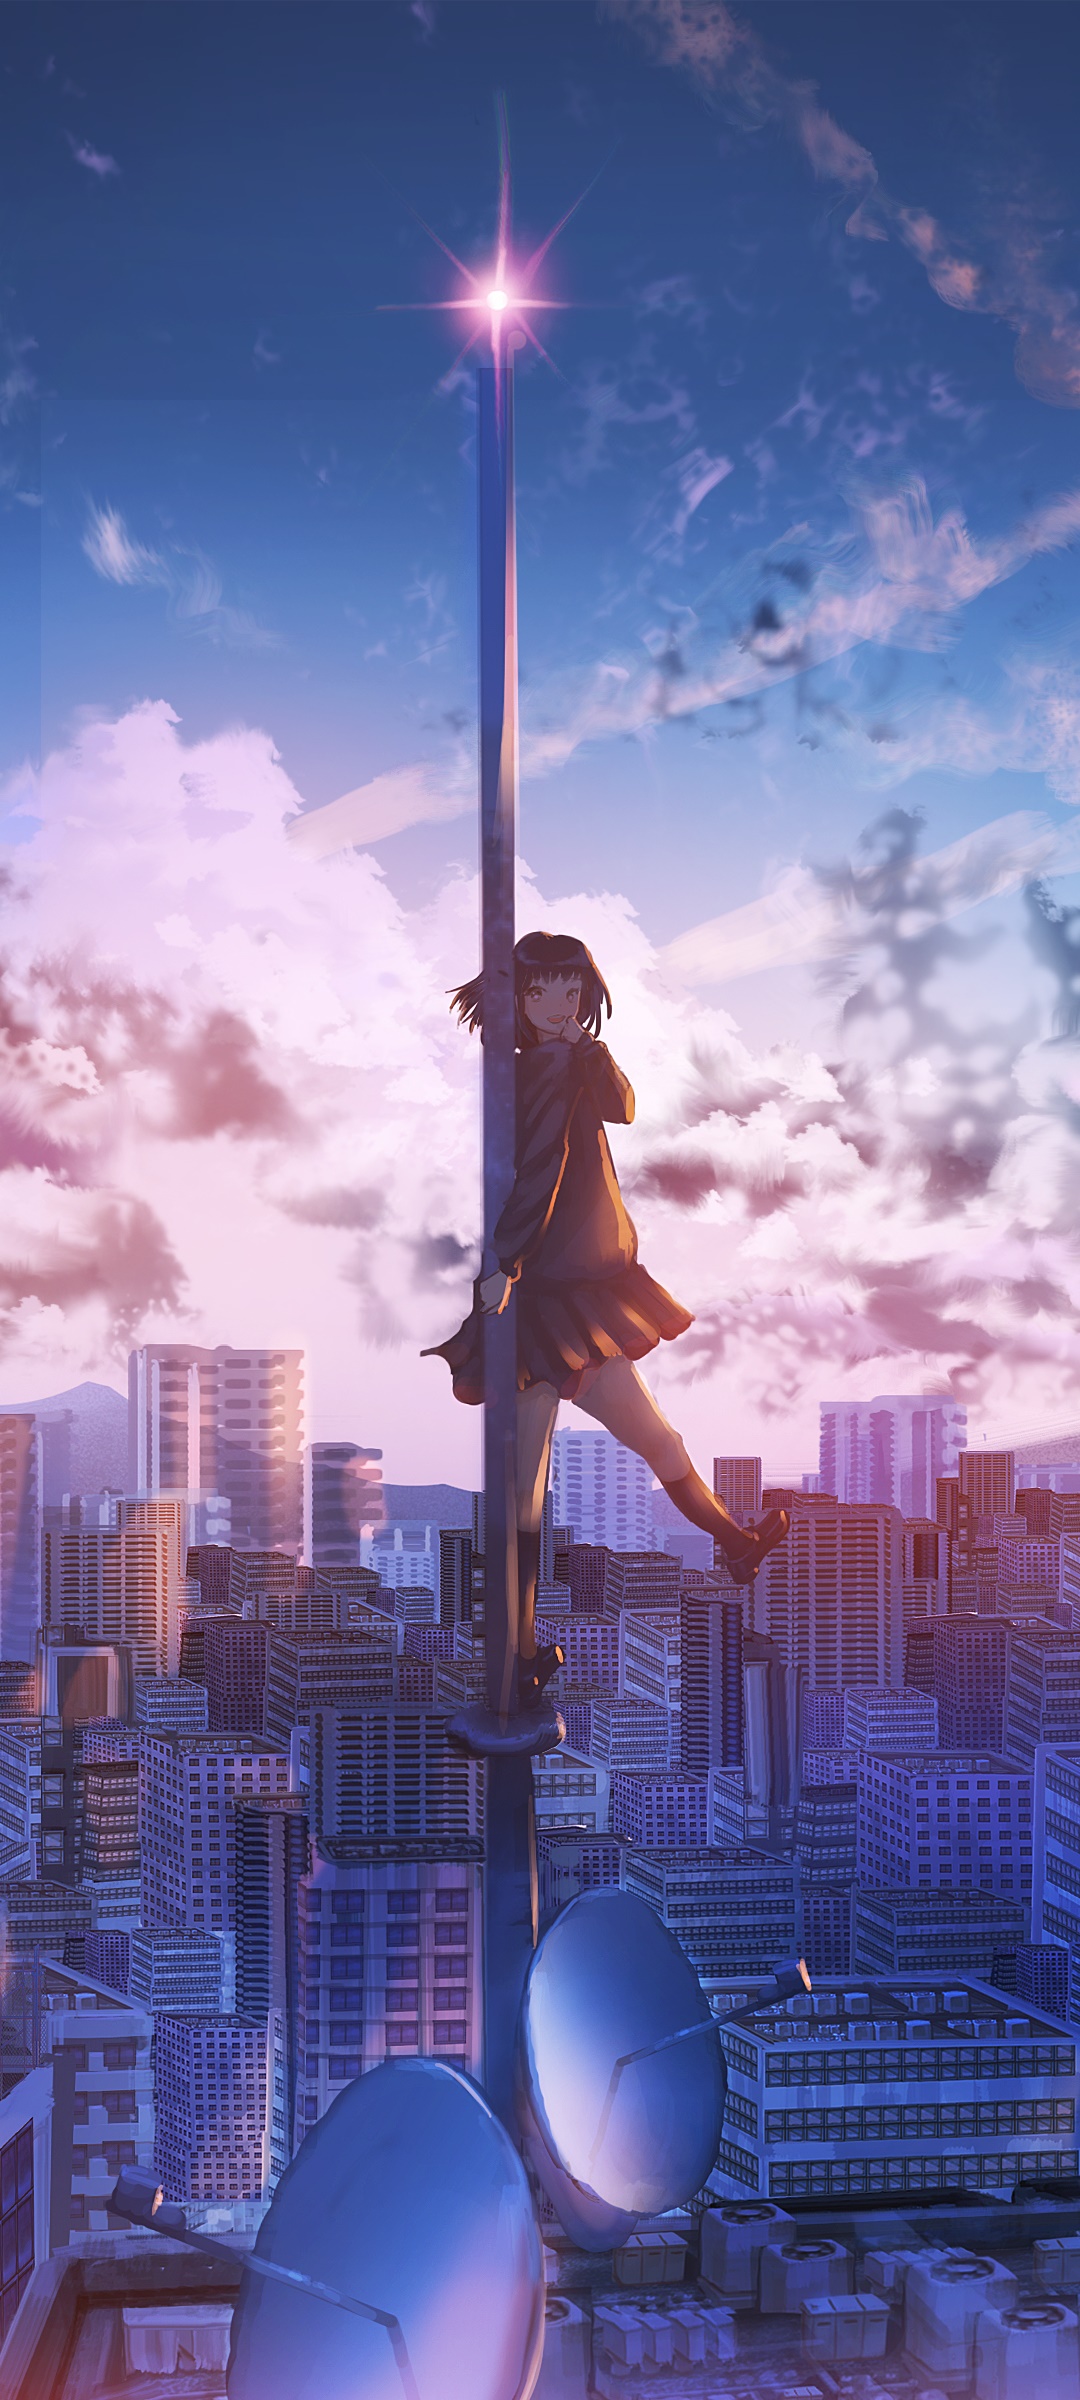 A woman is hanging from the top of an antenna - Anime city